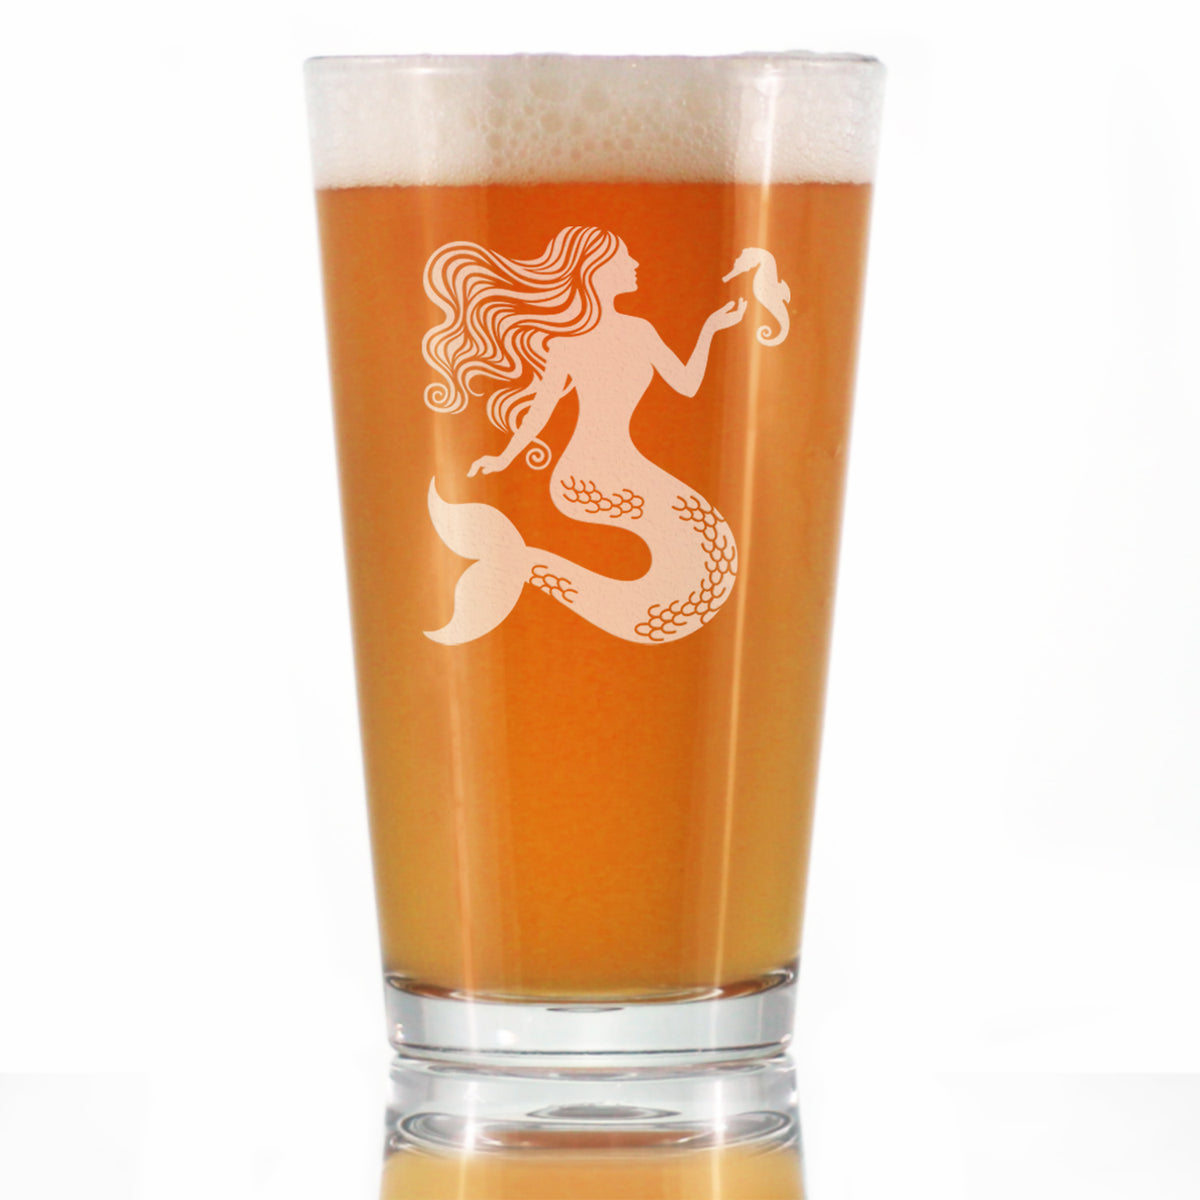 Mermaid Pint Glass for Beer - Fun Mermaids Themed Decor and Gifts for Beach Lovers - 16 Oz Glasses